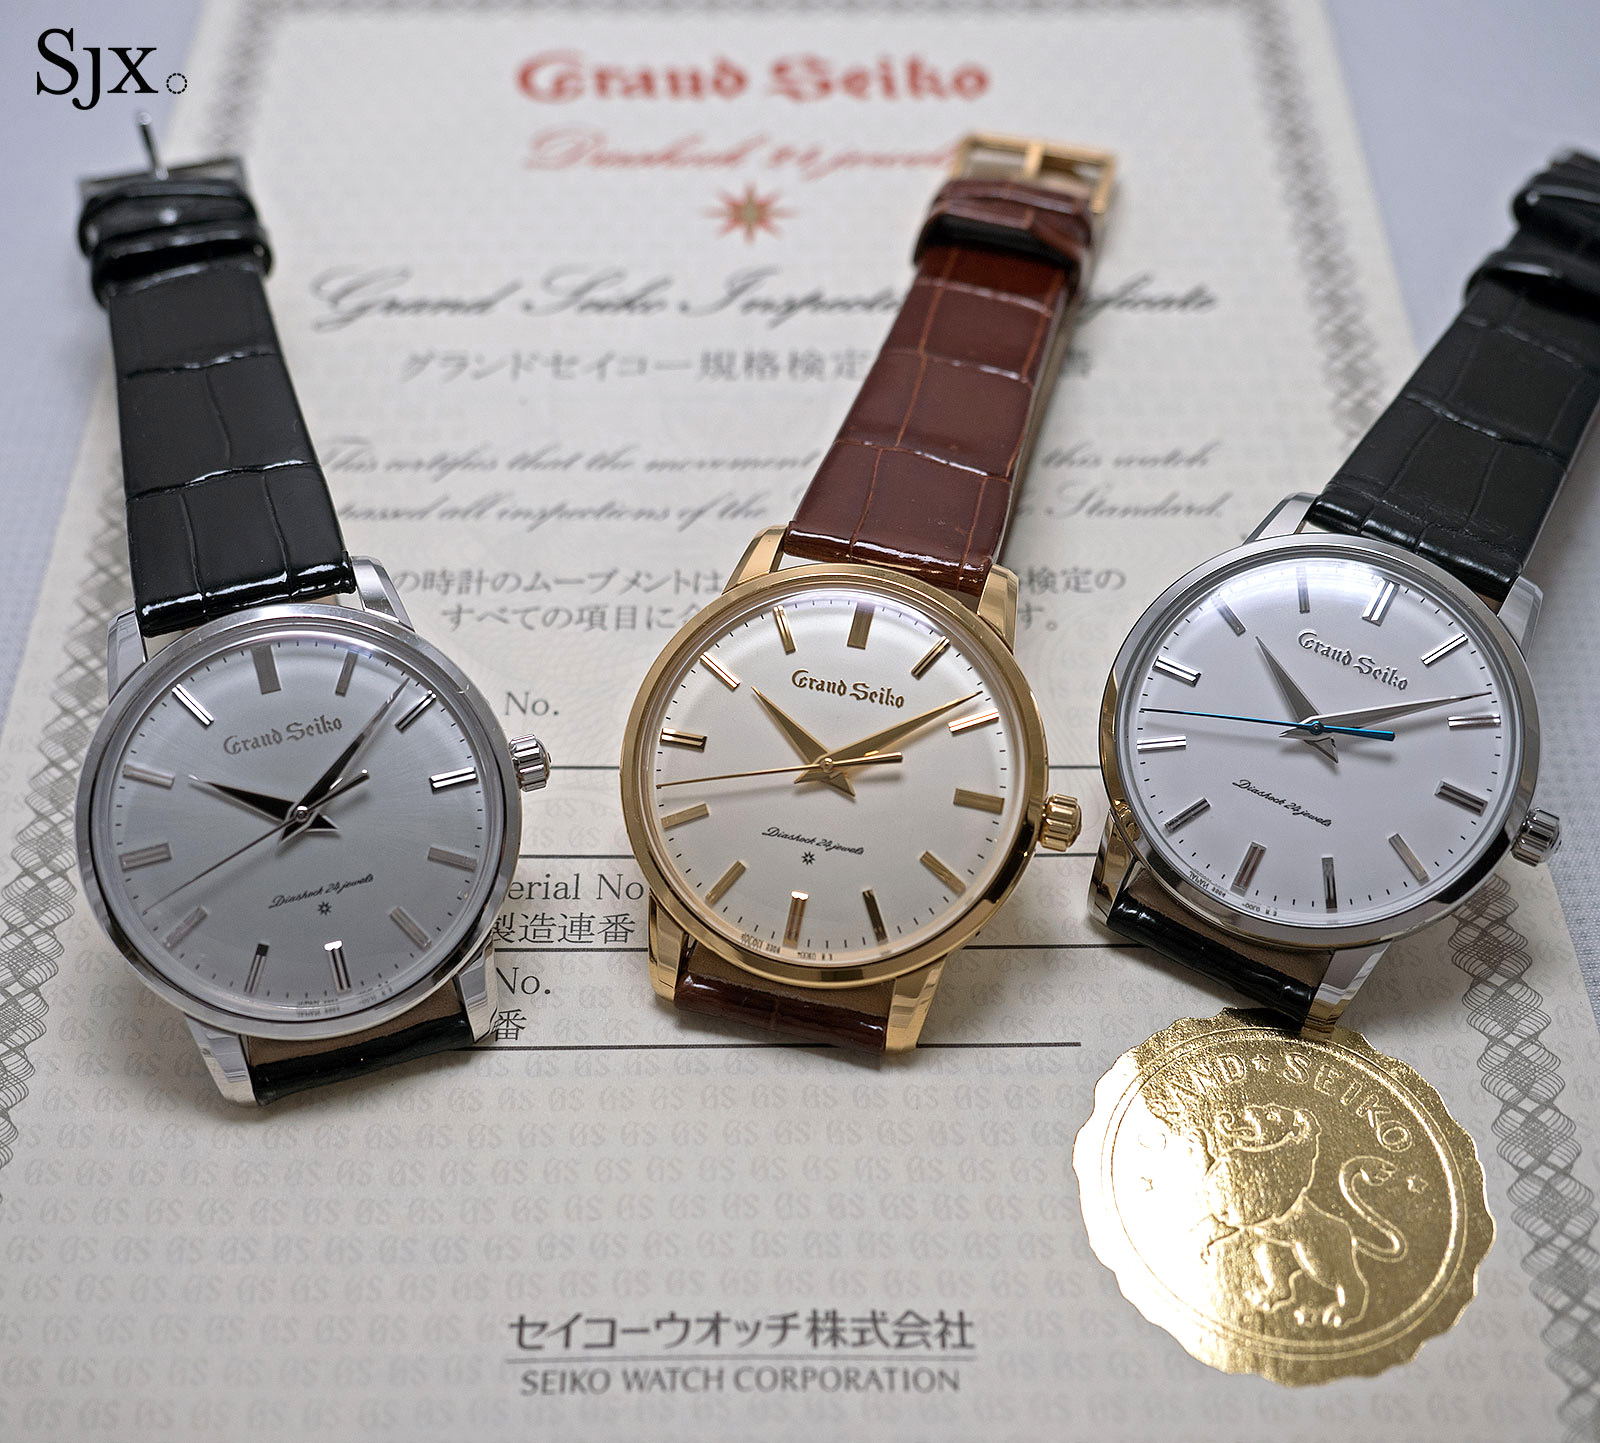 Hands On With The Grand Seiko Sbgw251 Sbgw2512 Sbgw253 Reissue Of 1960 S Ref 3180 Sjx Watches